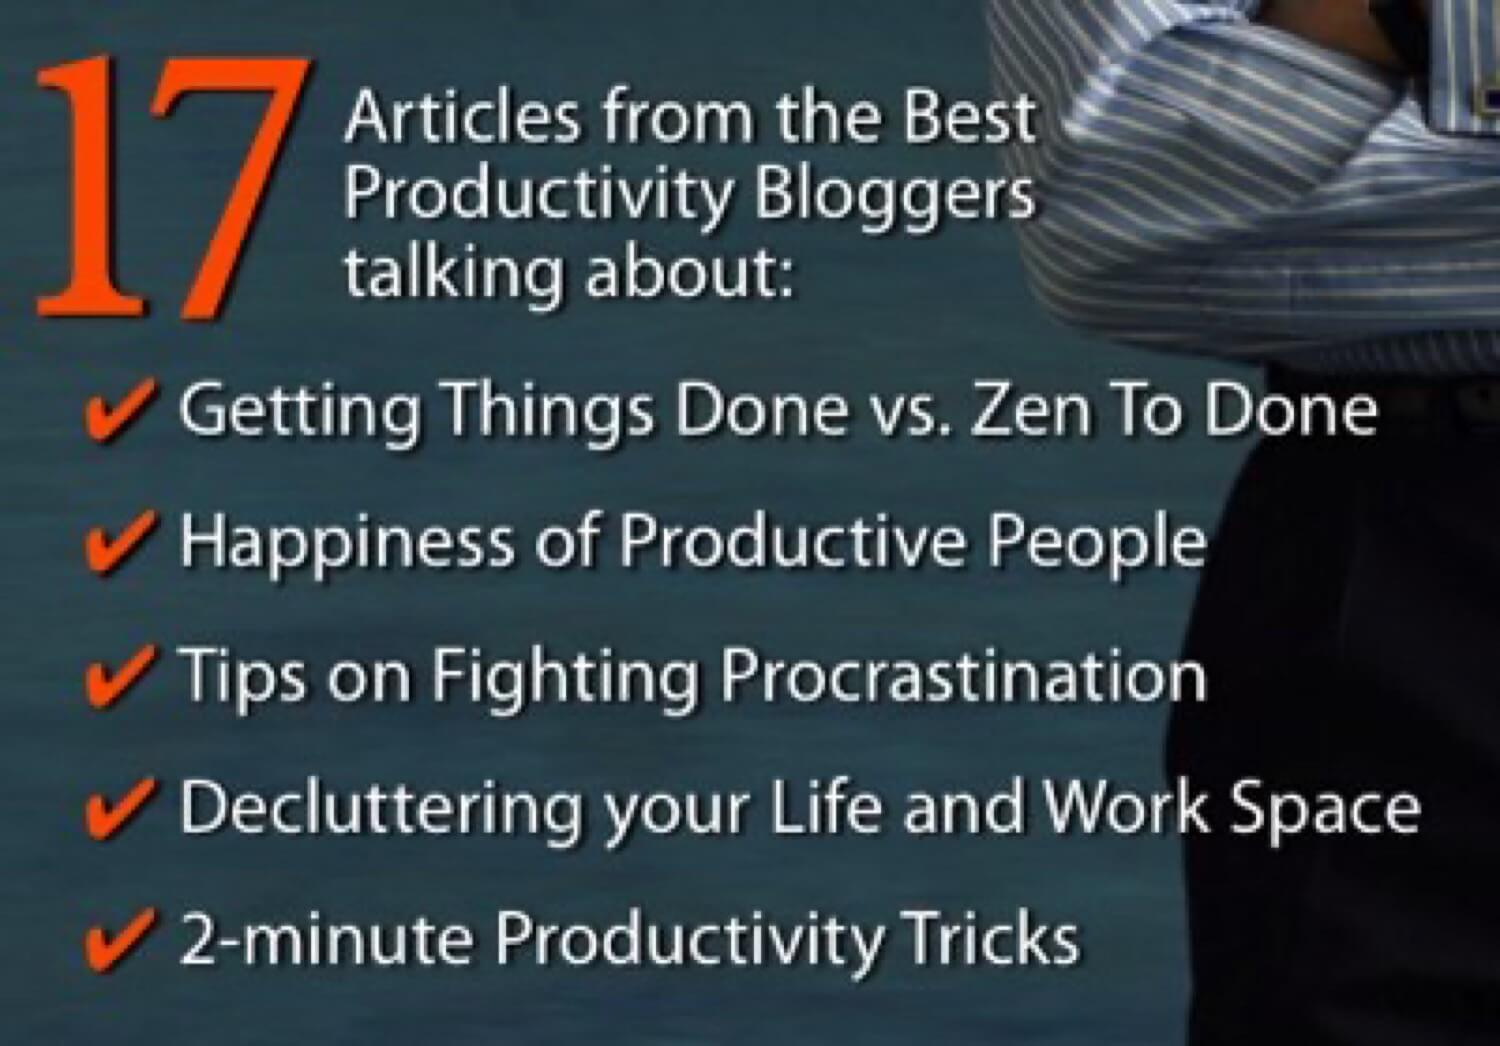 Why do we need the Productive! Magazine? Let’s rediscover the obvious.